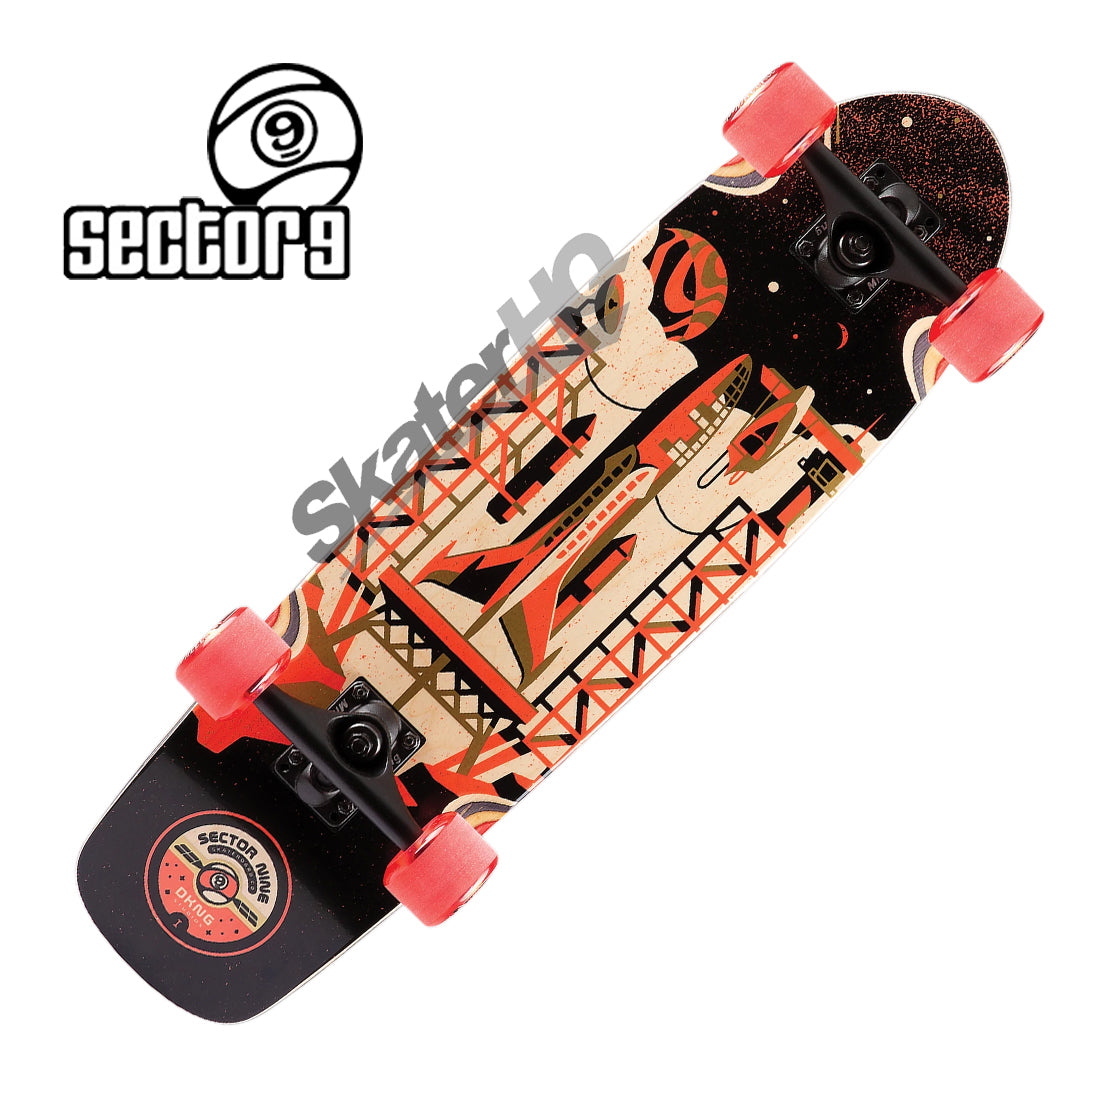 Sector 9 Launch 7.875x28.5 Complete - Red Skateboard Completes Longboards